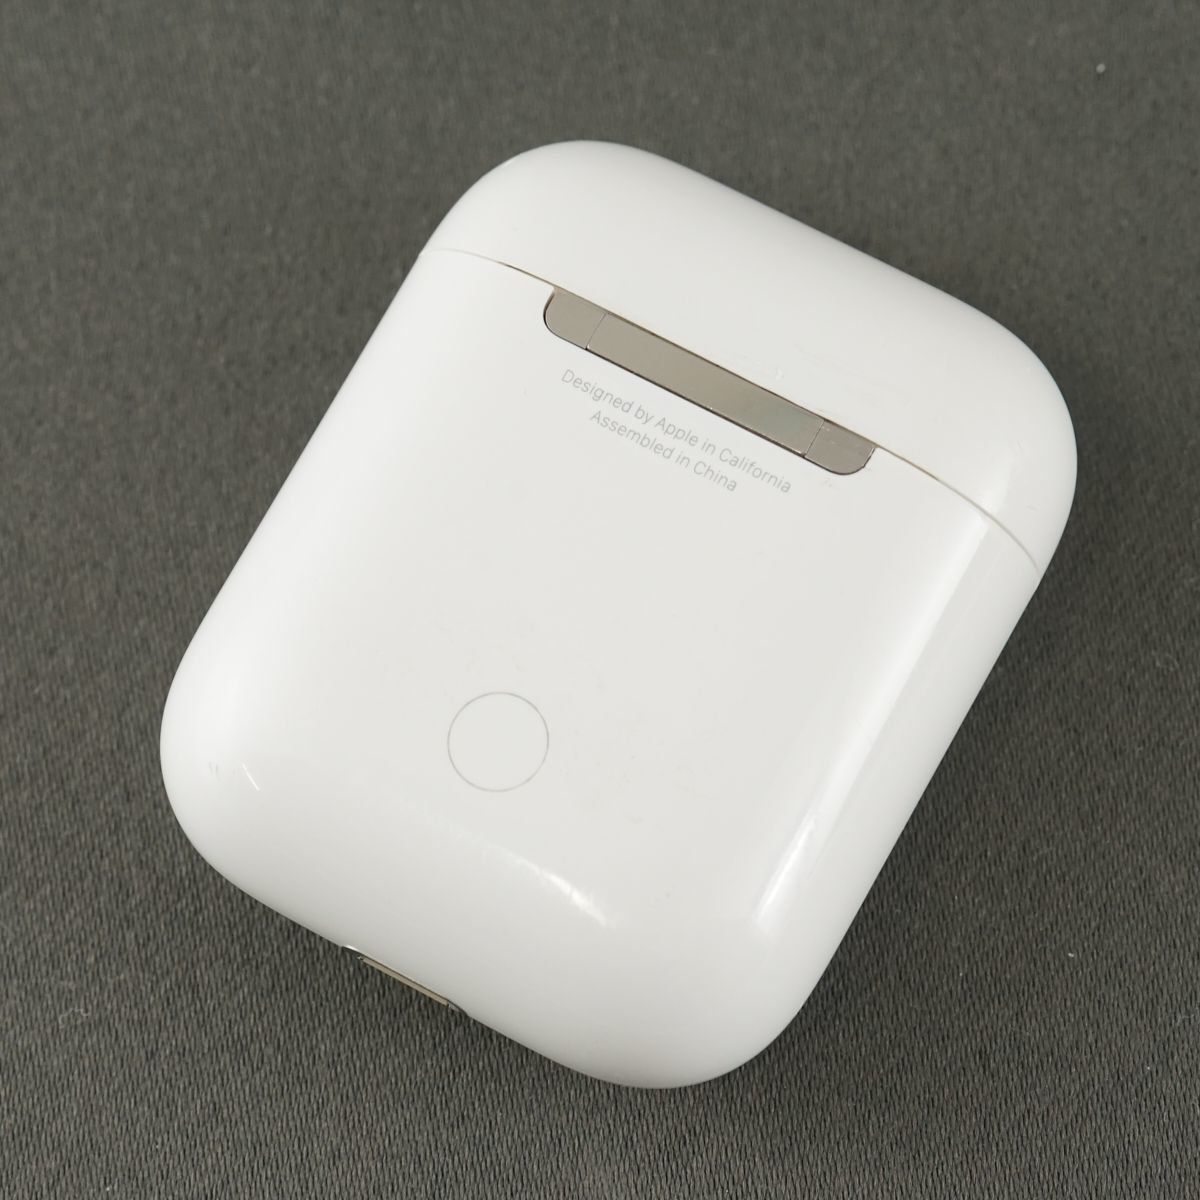 Apple AirPods with Charging Case エアーポッズ ワイヤレスイヤホン USED品 第二世代 Bluetooth MV7N2J/A 完動品 即日発送 T V8018_画像8